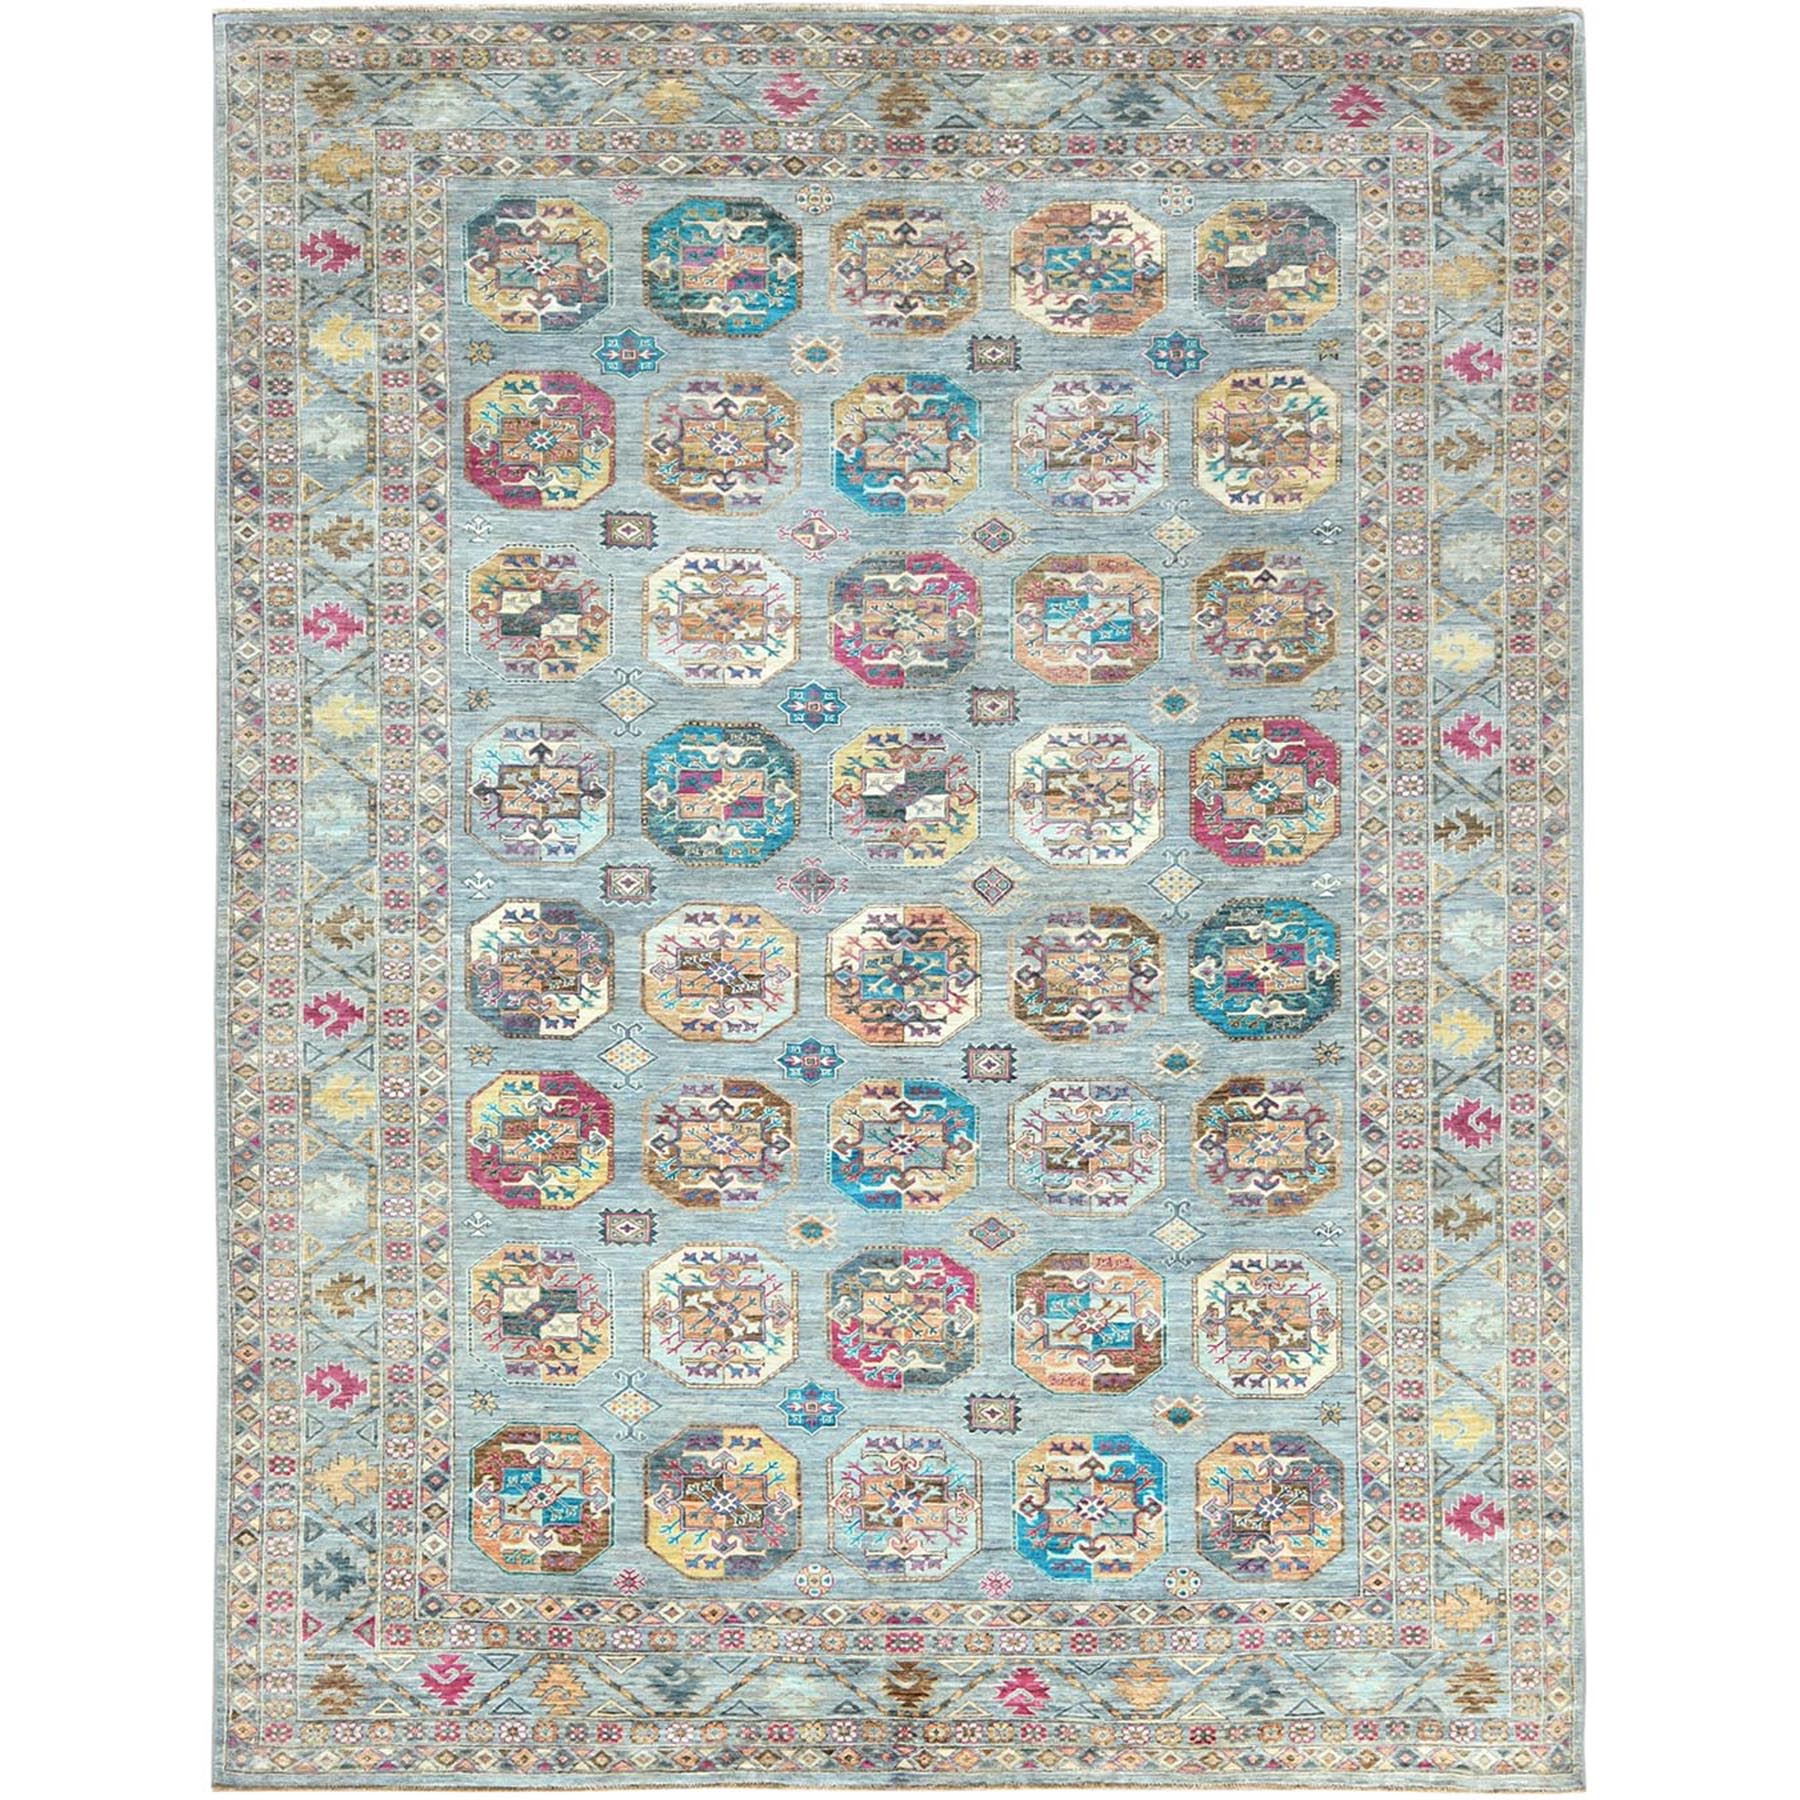  Wool Hand-Knotted Area Rug 8'8